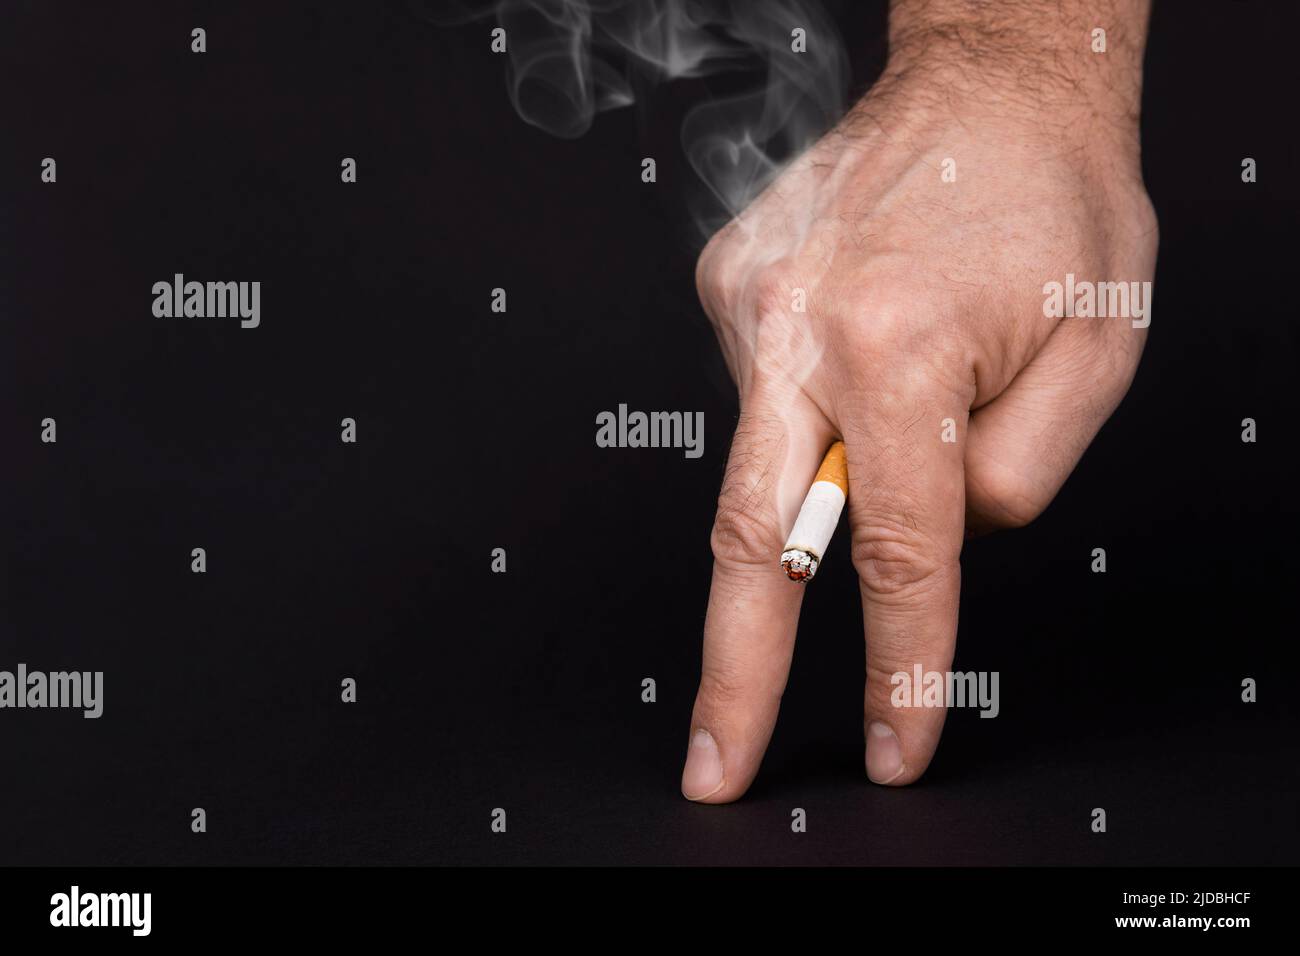 Impotence in men. Cigarette in hand with smoke isolated on a black background, close up. Harm of smoking for men. Erectile dysfunction, impotence in men caused by smoking. Smoked cigarette in fingers Stock Photo